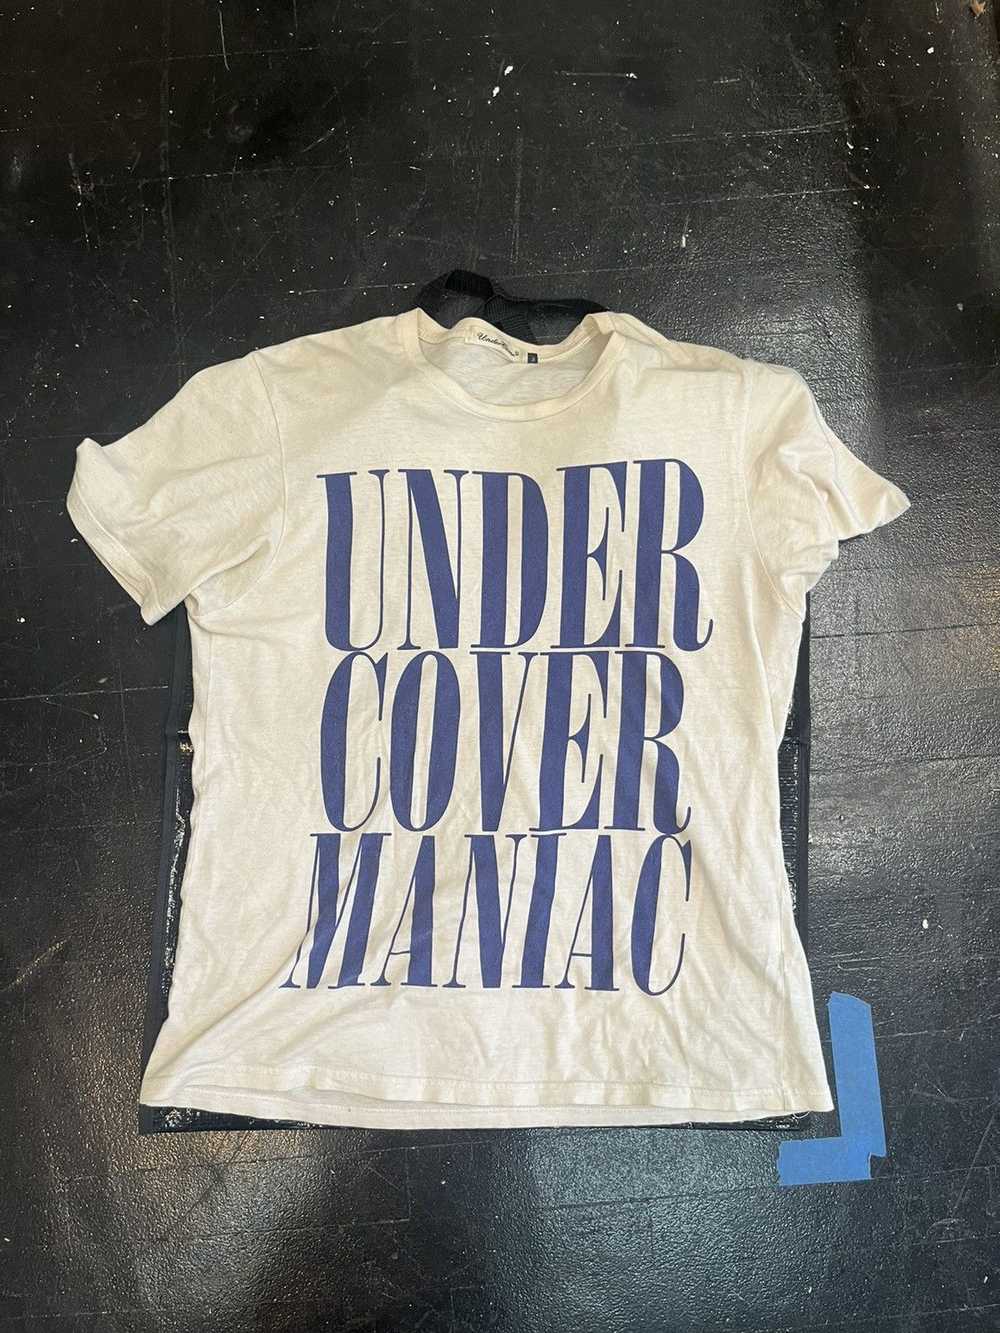 Undercover Undercover Maniac T-Shirt - image 1